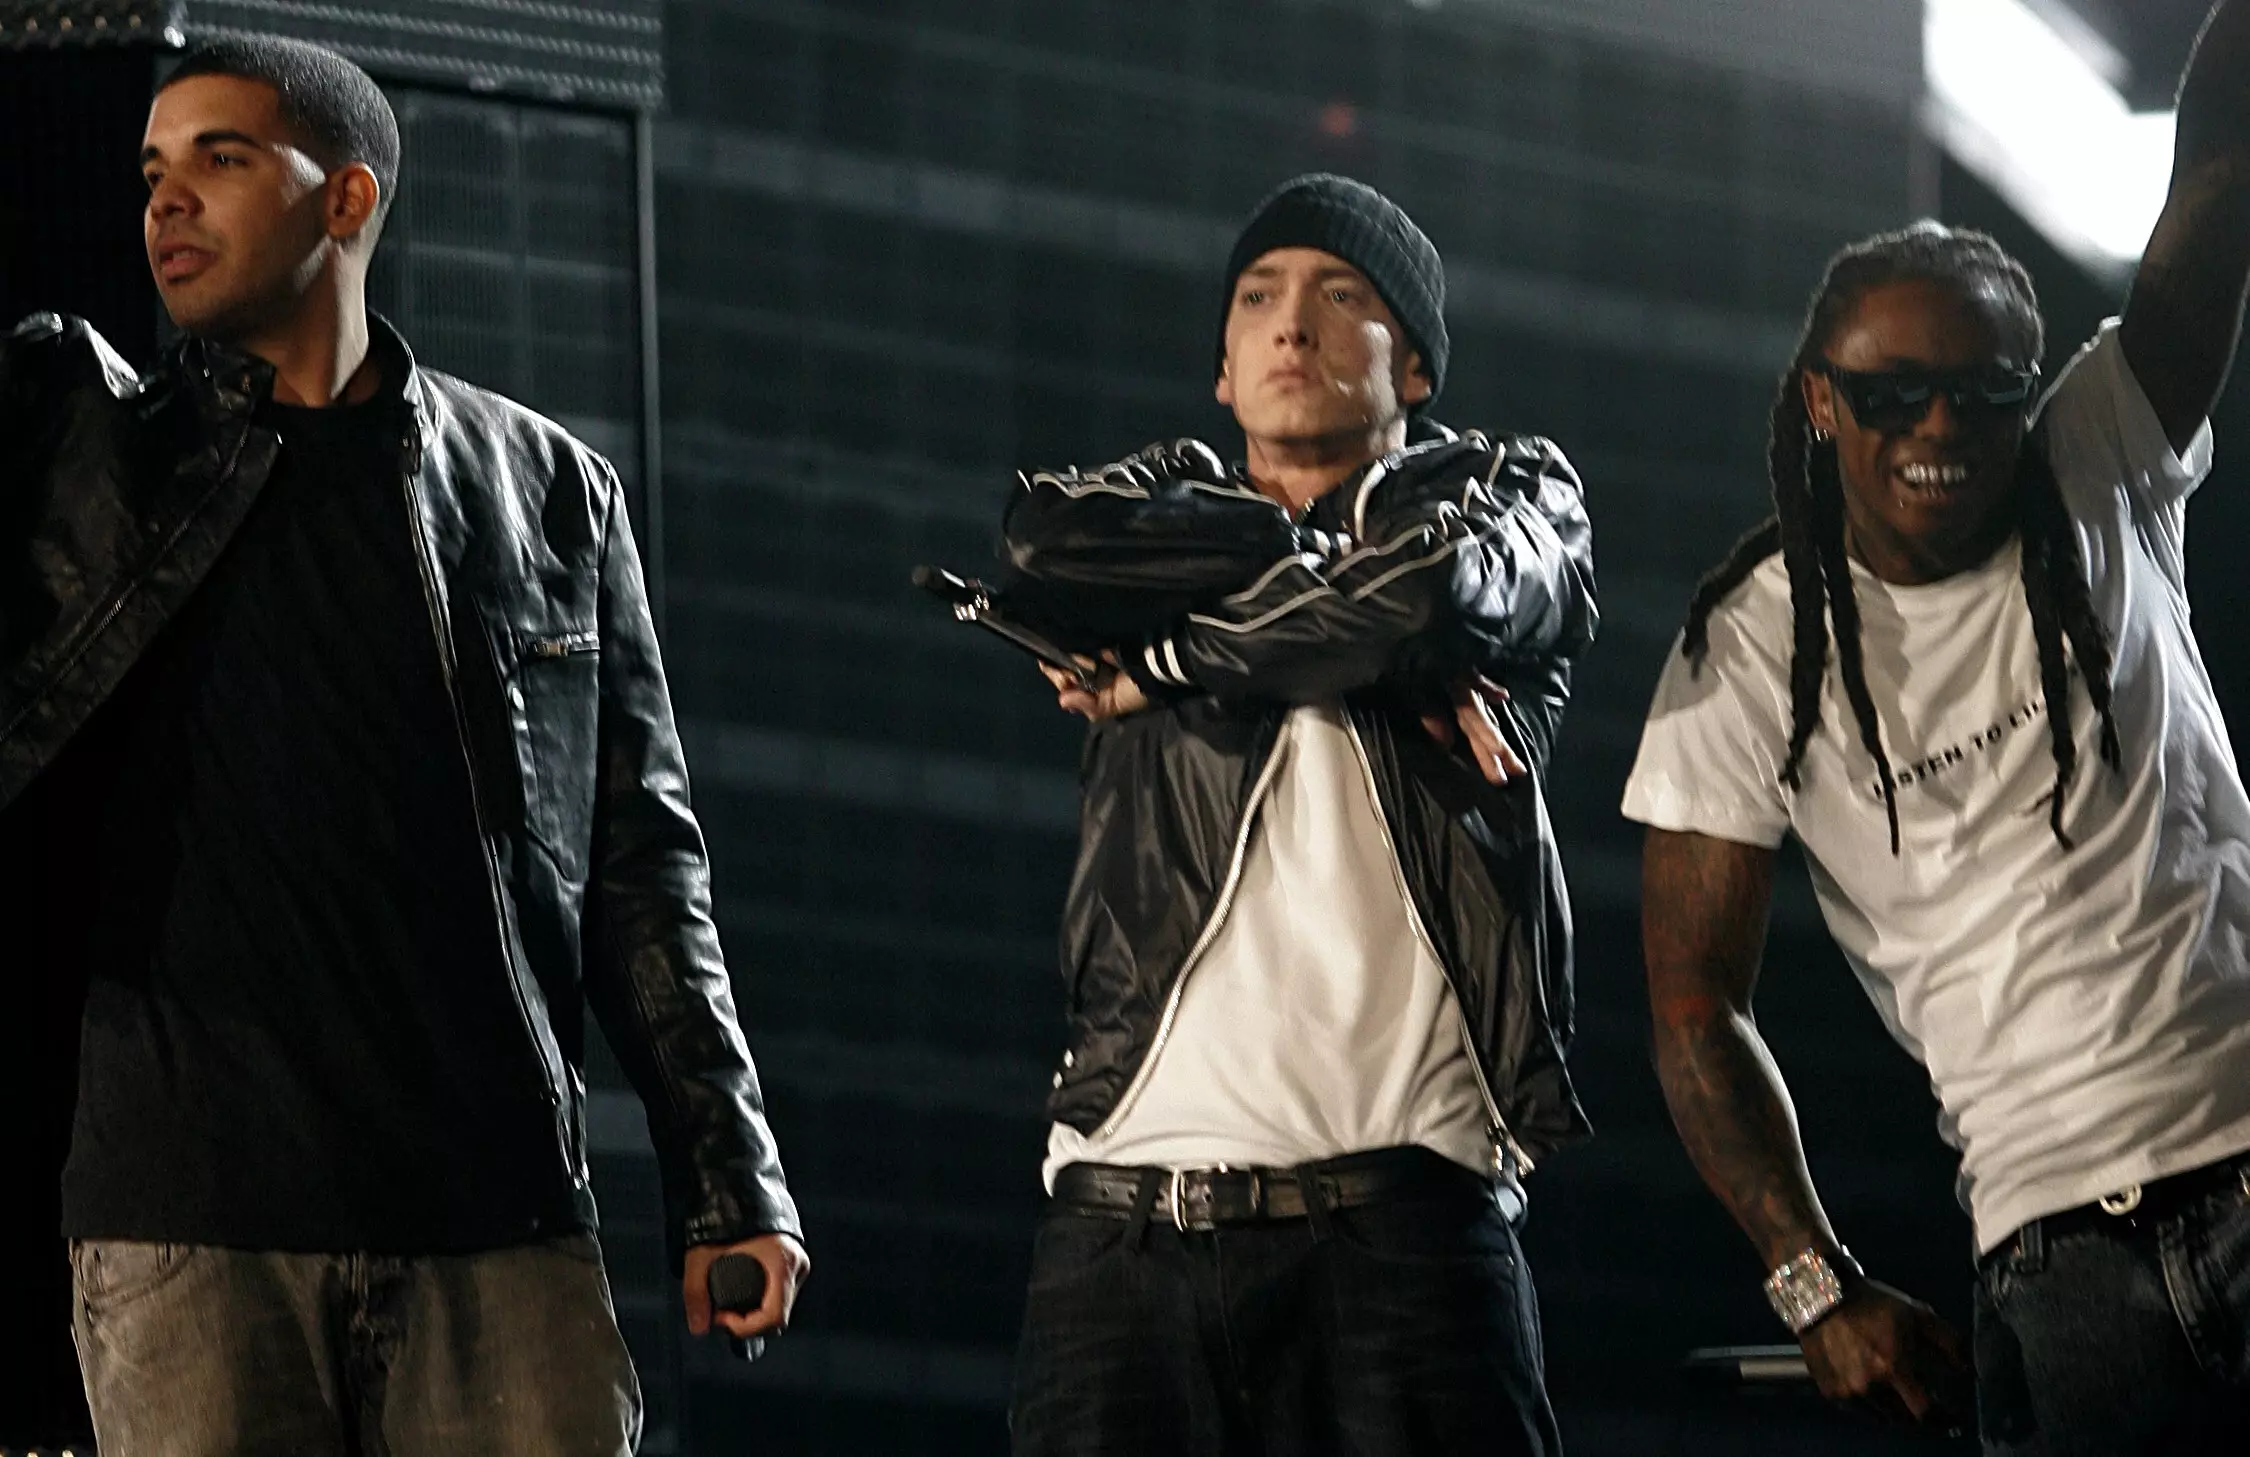 Drake, Eminem and Lil Wayne perform at the 52nd annual Grammy Awards in LA, 2010 (